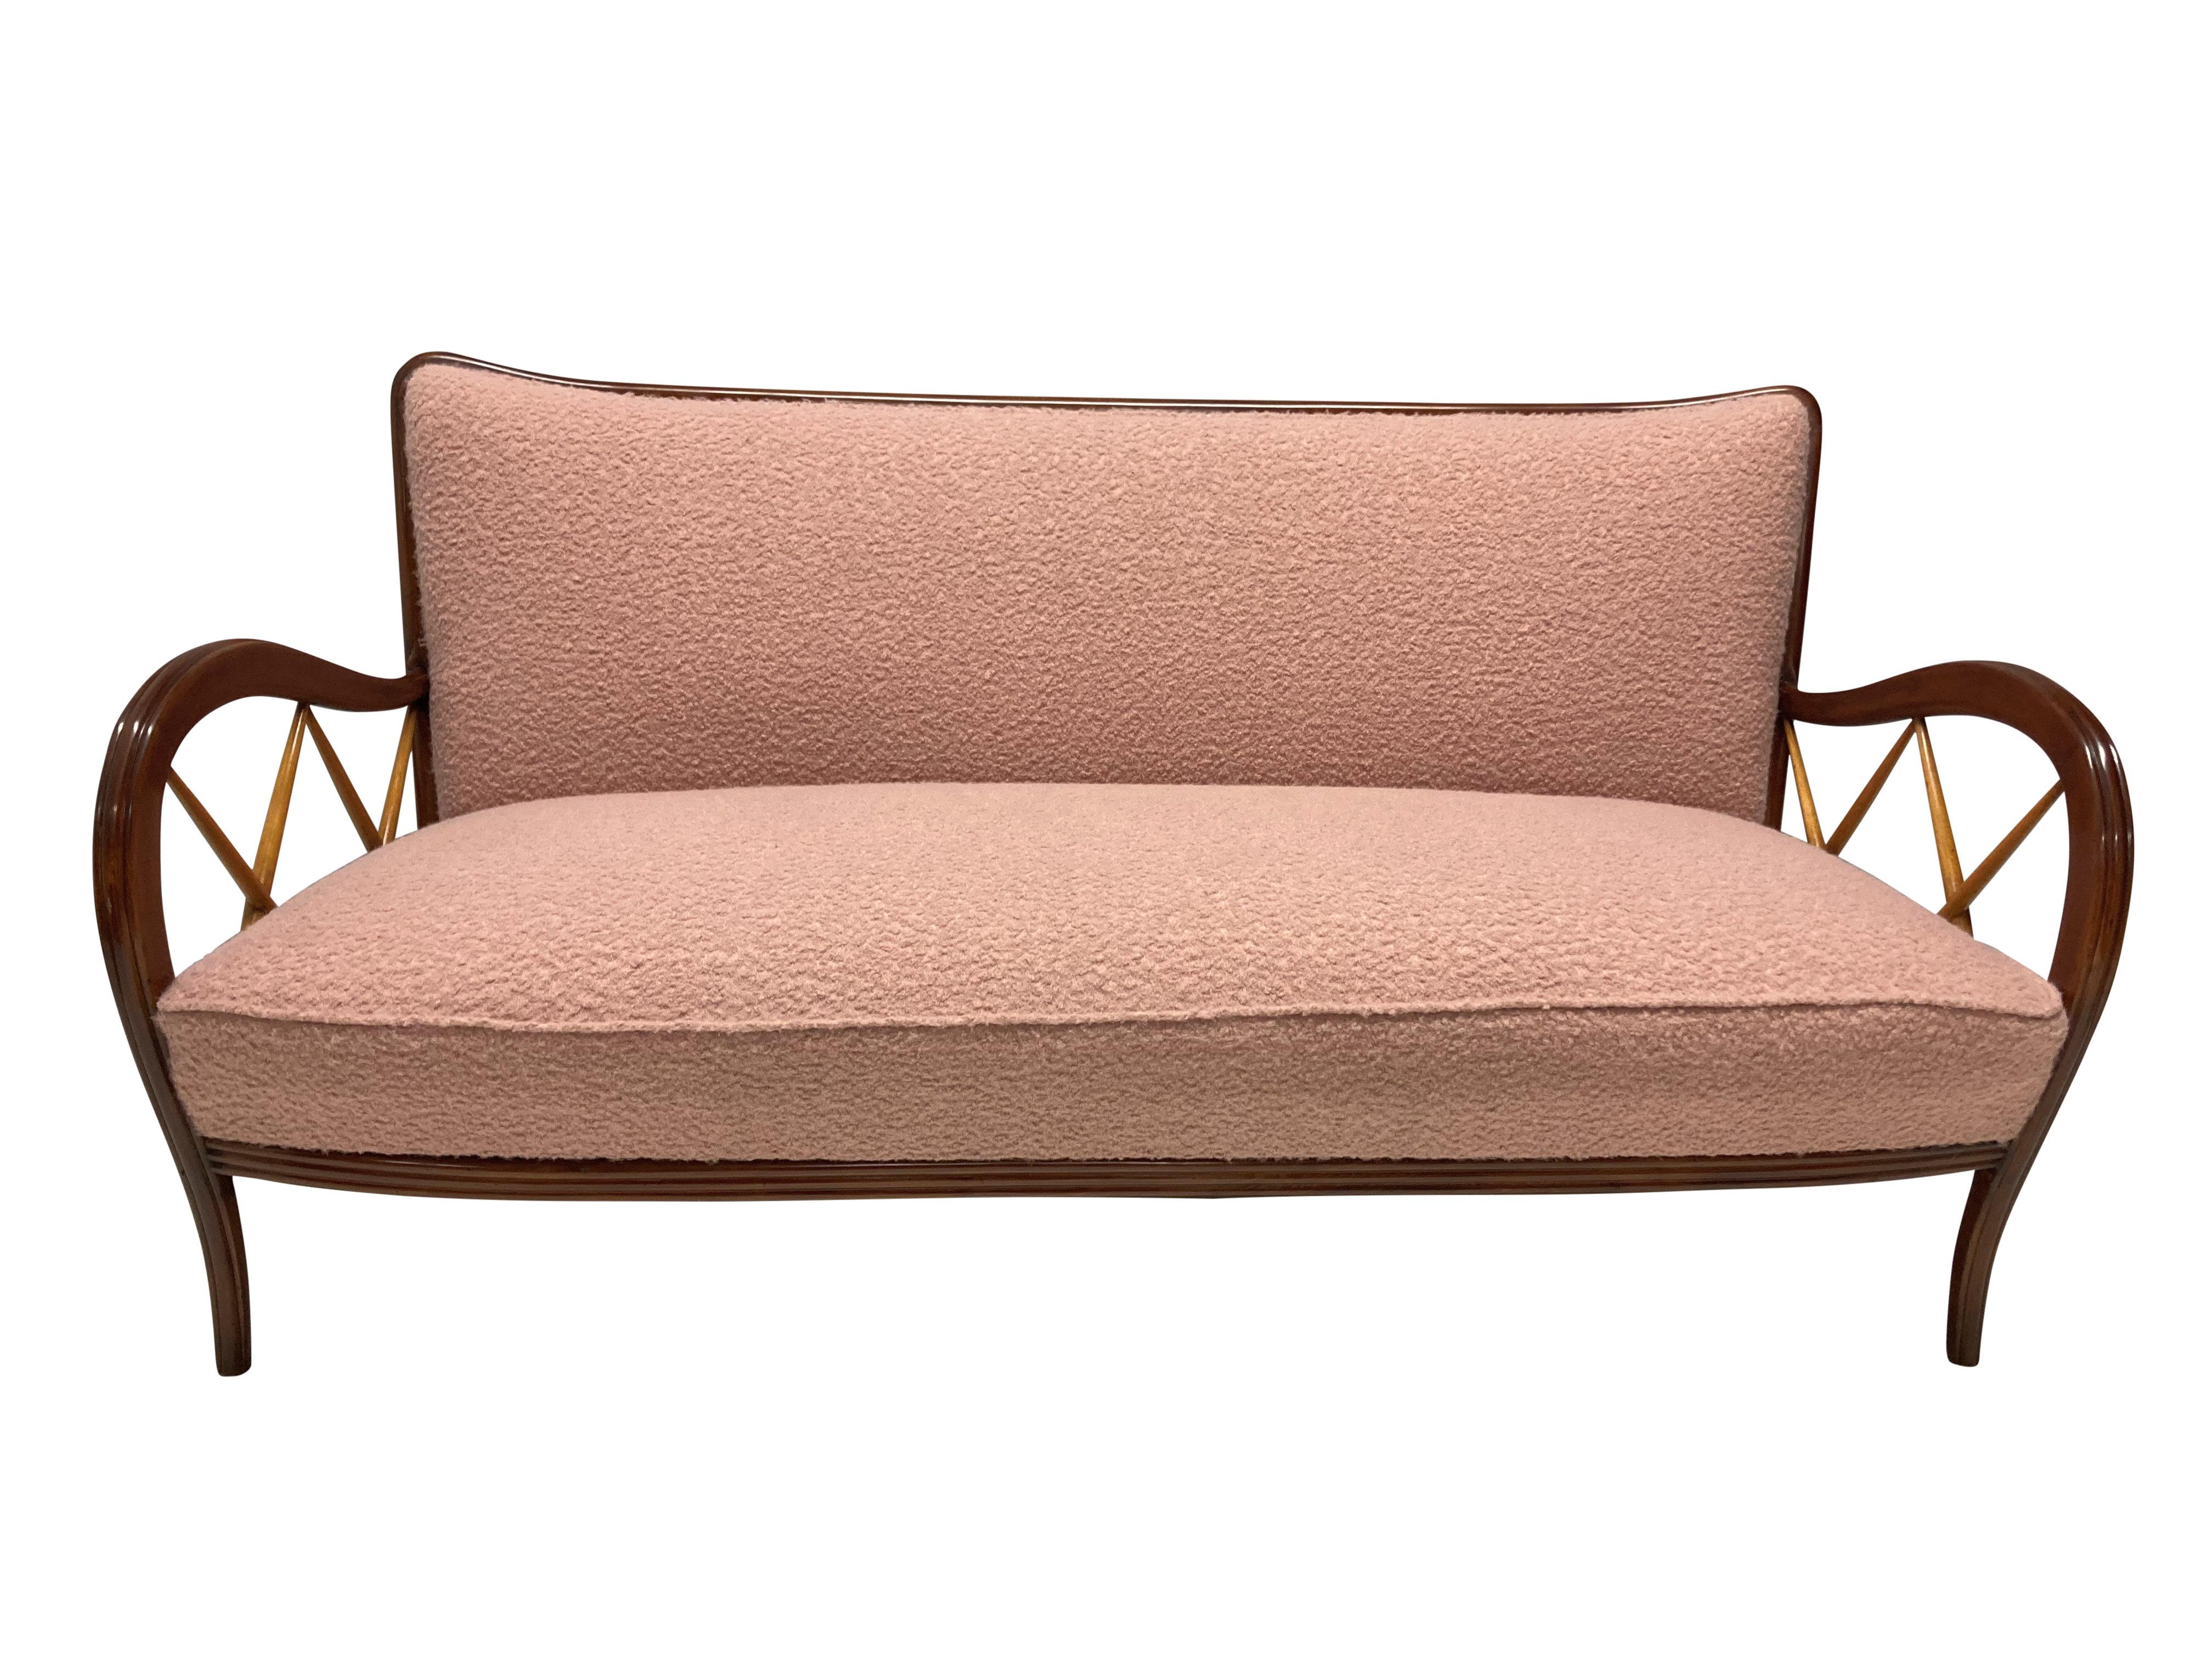 A stylish Italian sofa by Paolo Buffa. In walnut and blondwood and newly upholstered in dusty pink boucle. En suite with a matching pair of armchairs.